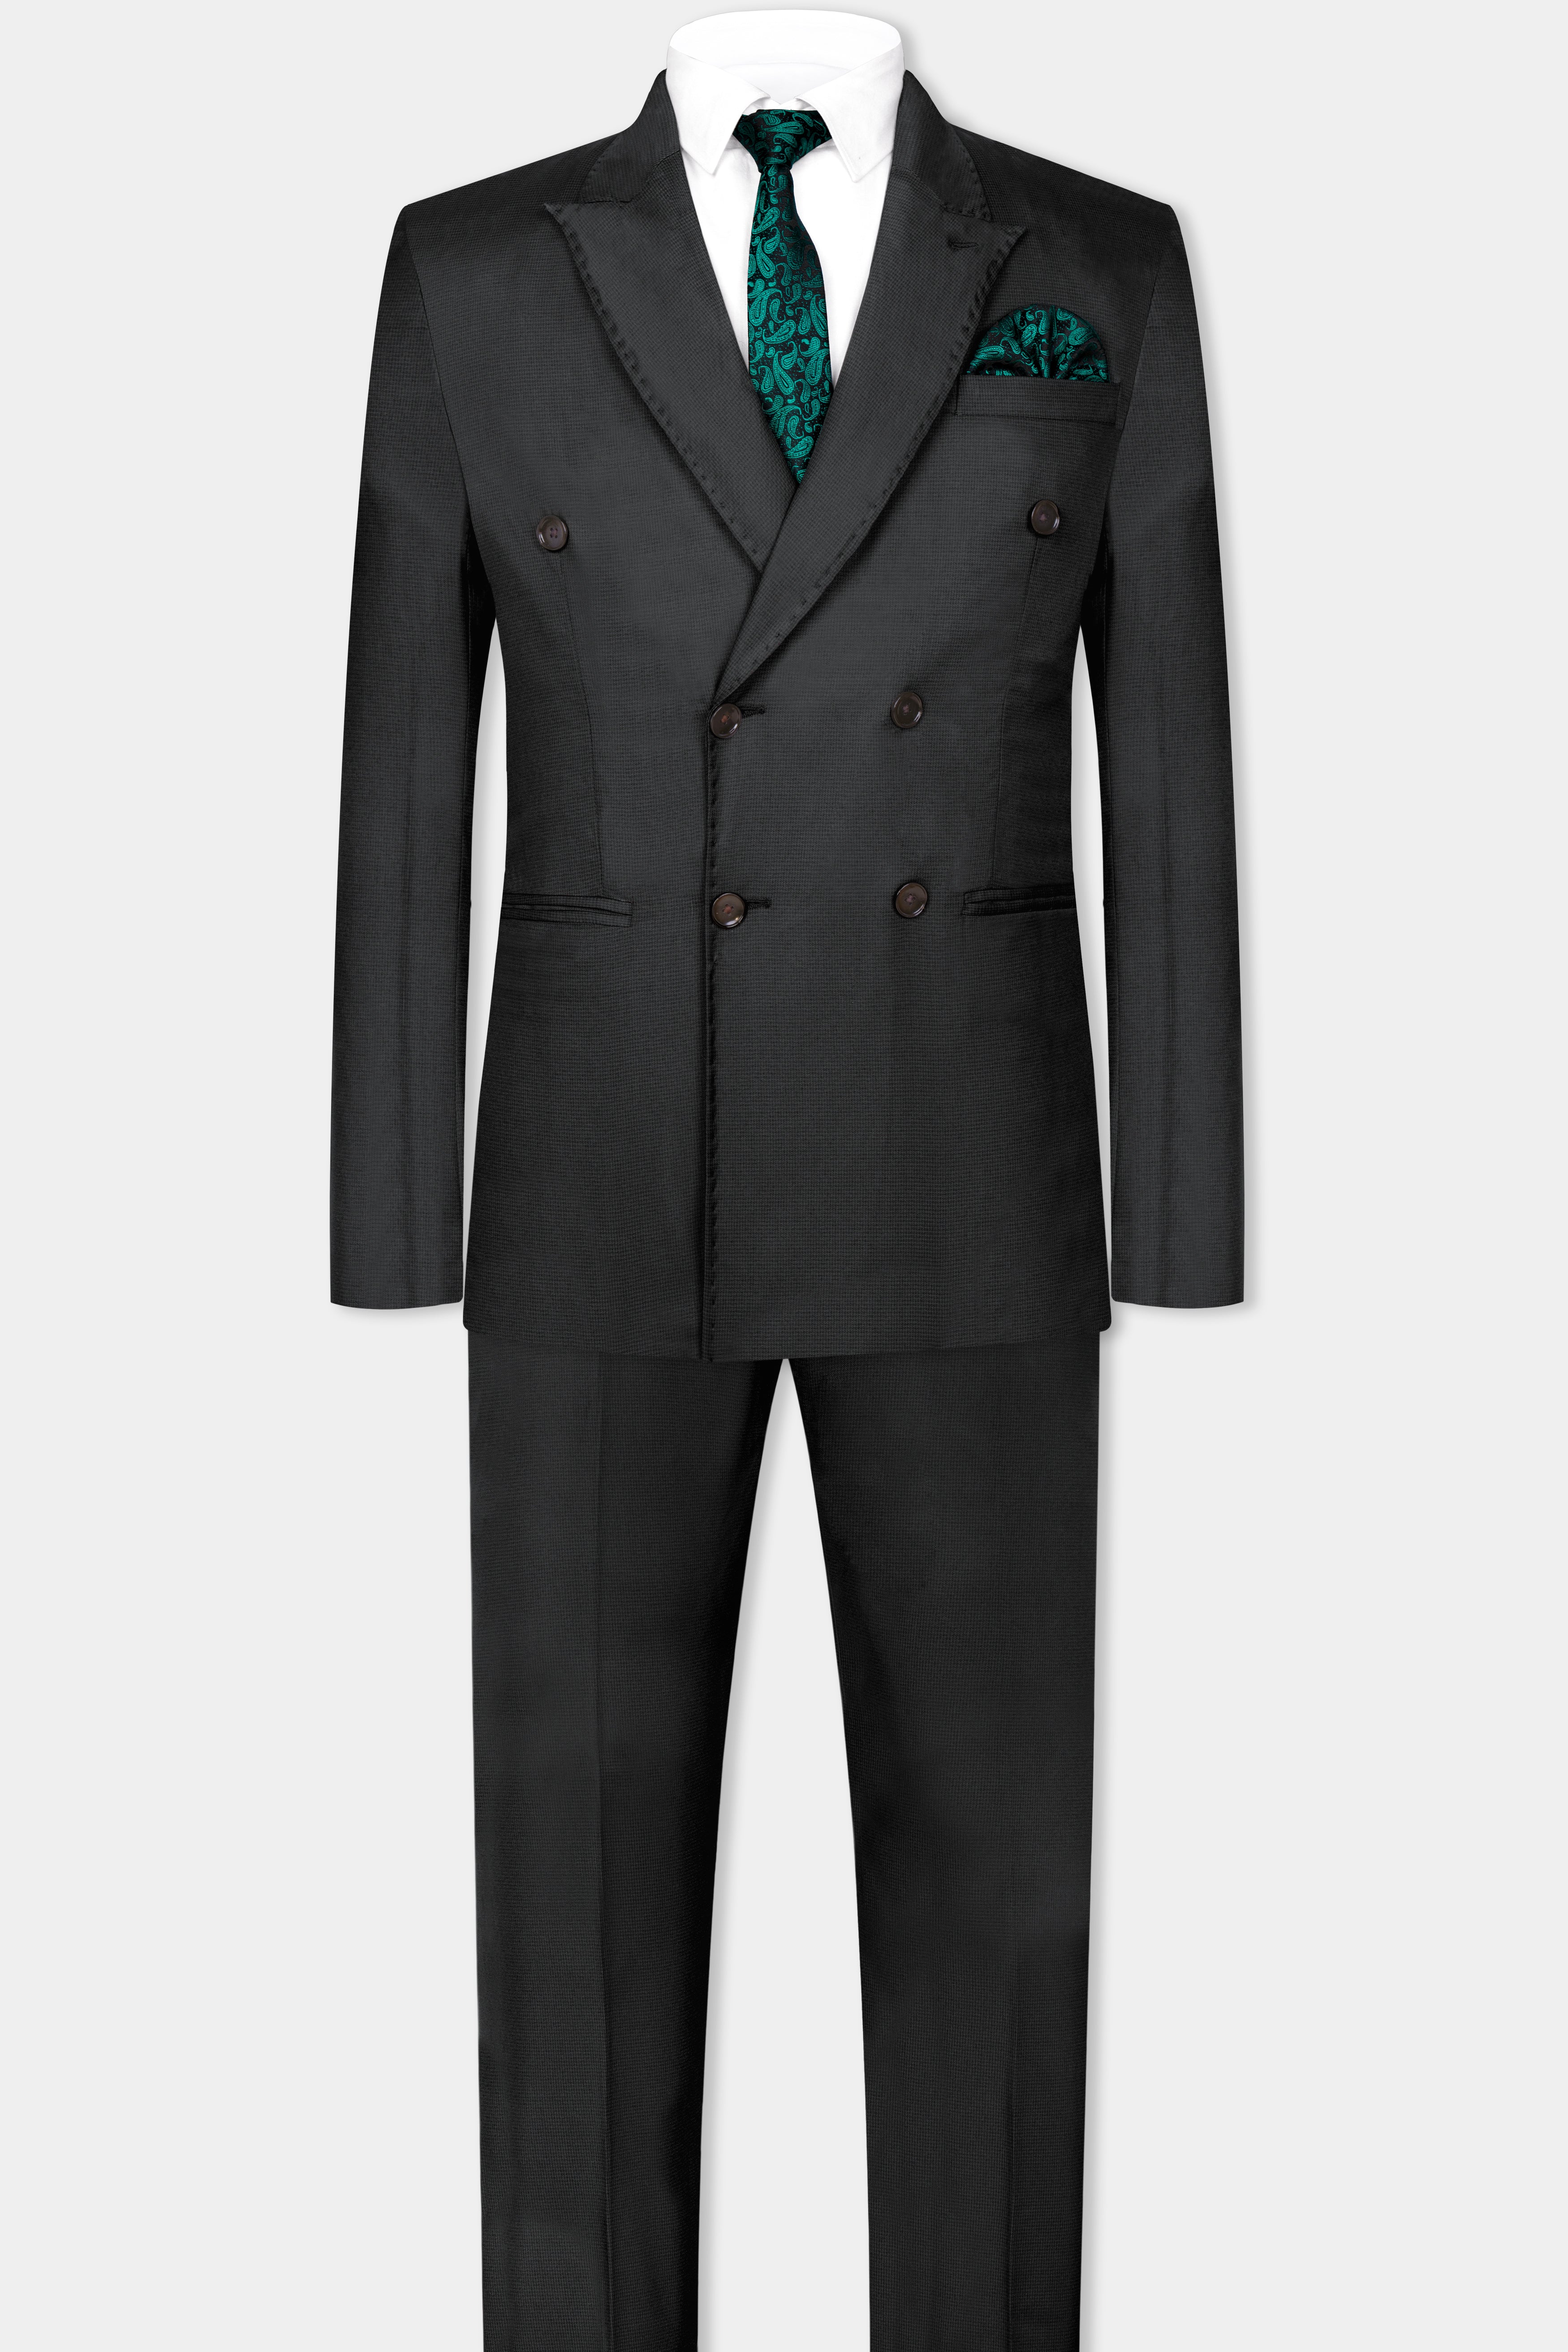 Vulcan Black Wool Rich Double Breasted Suit